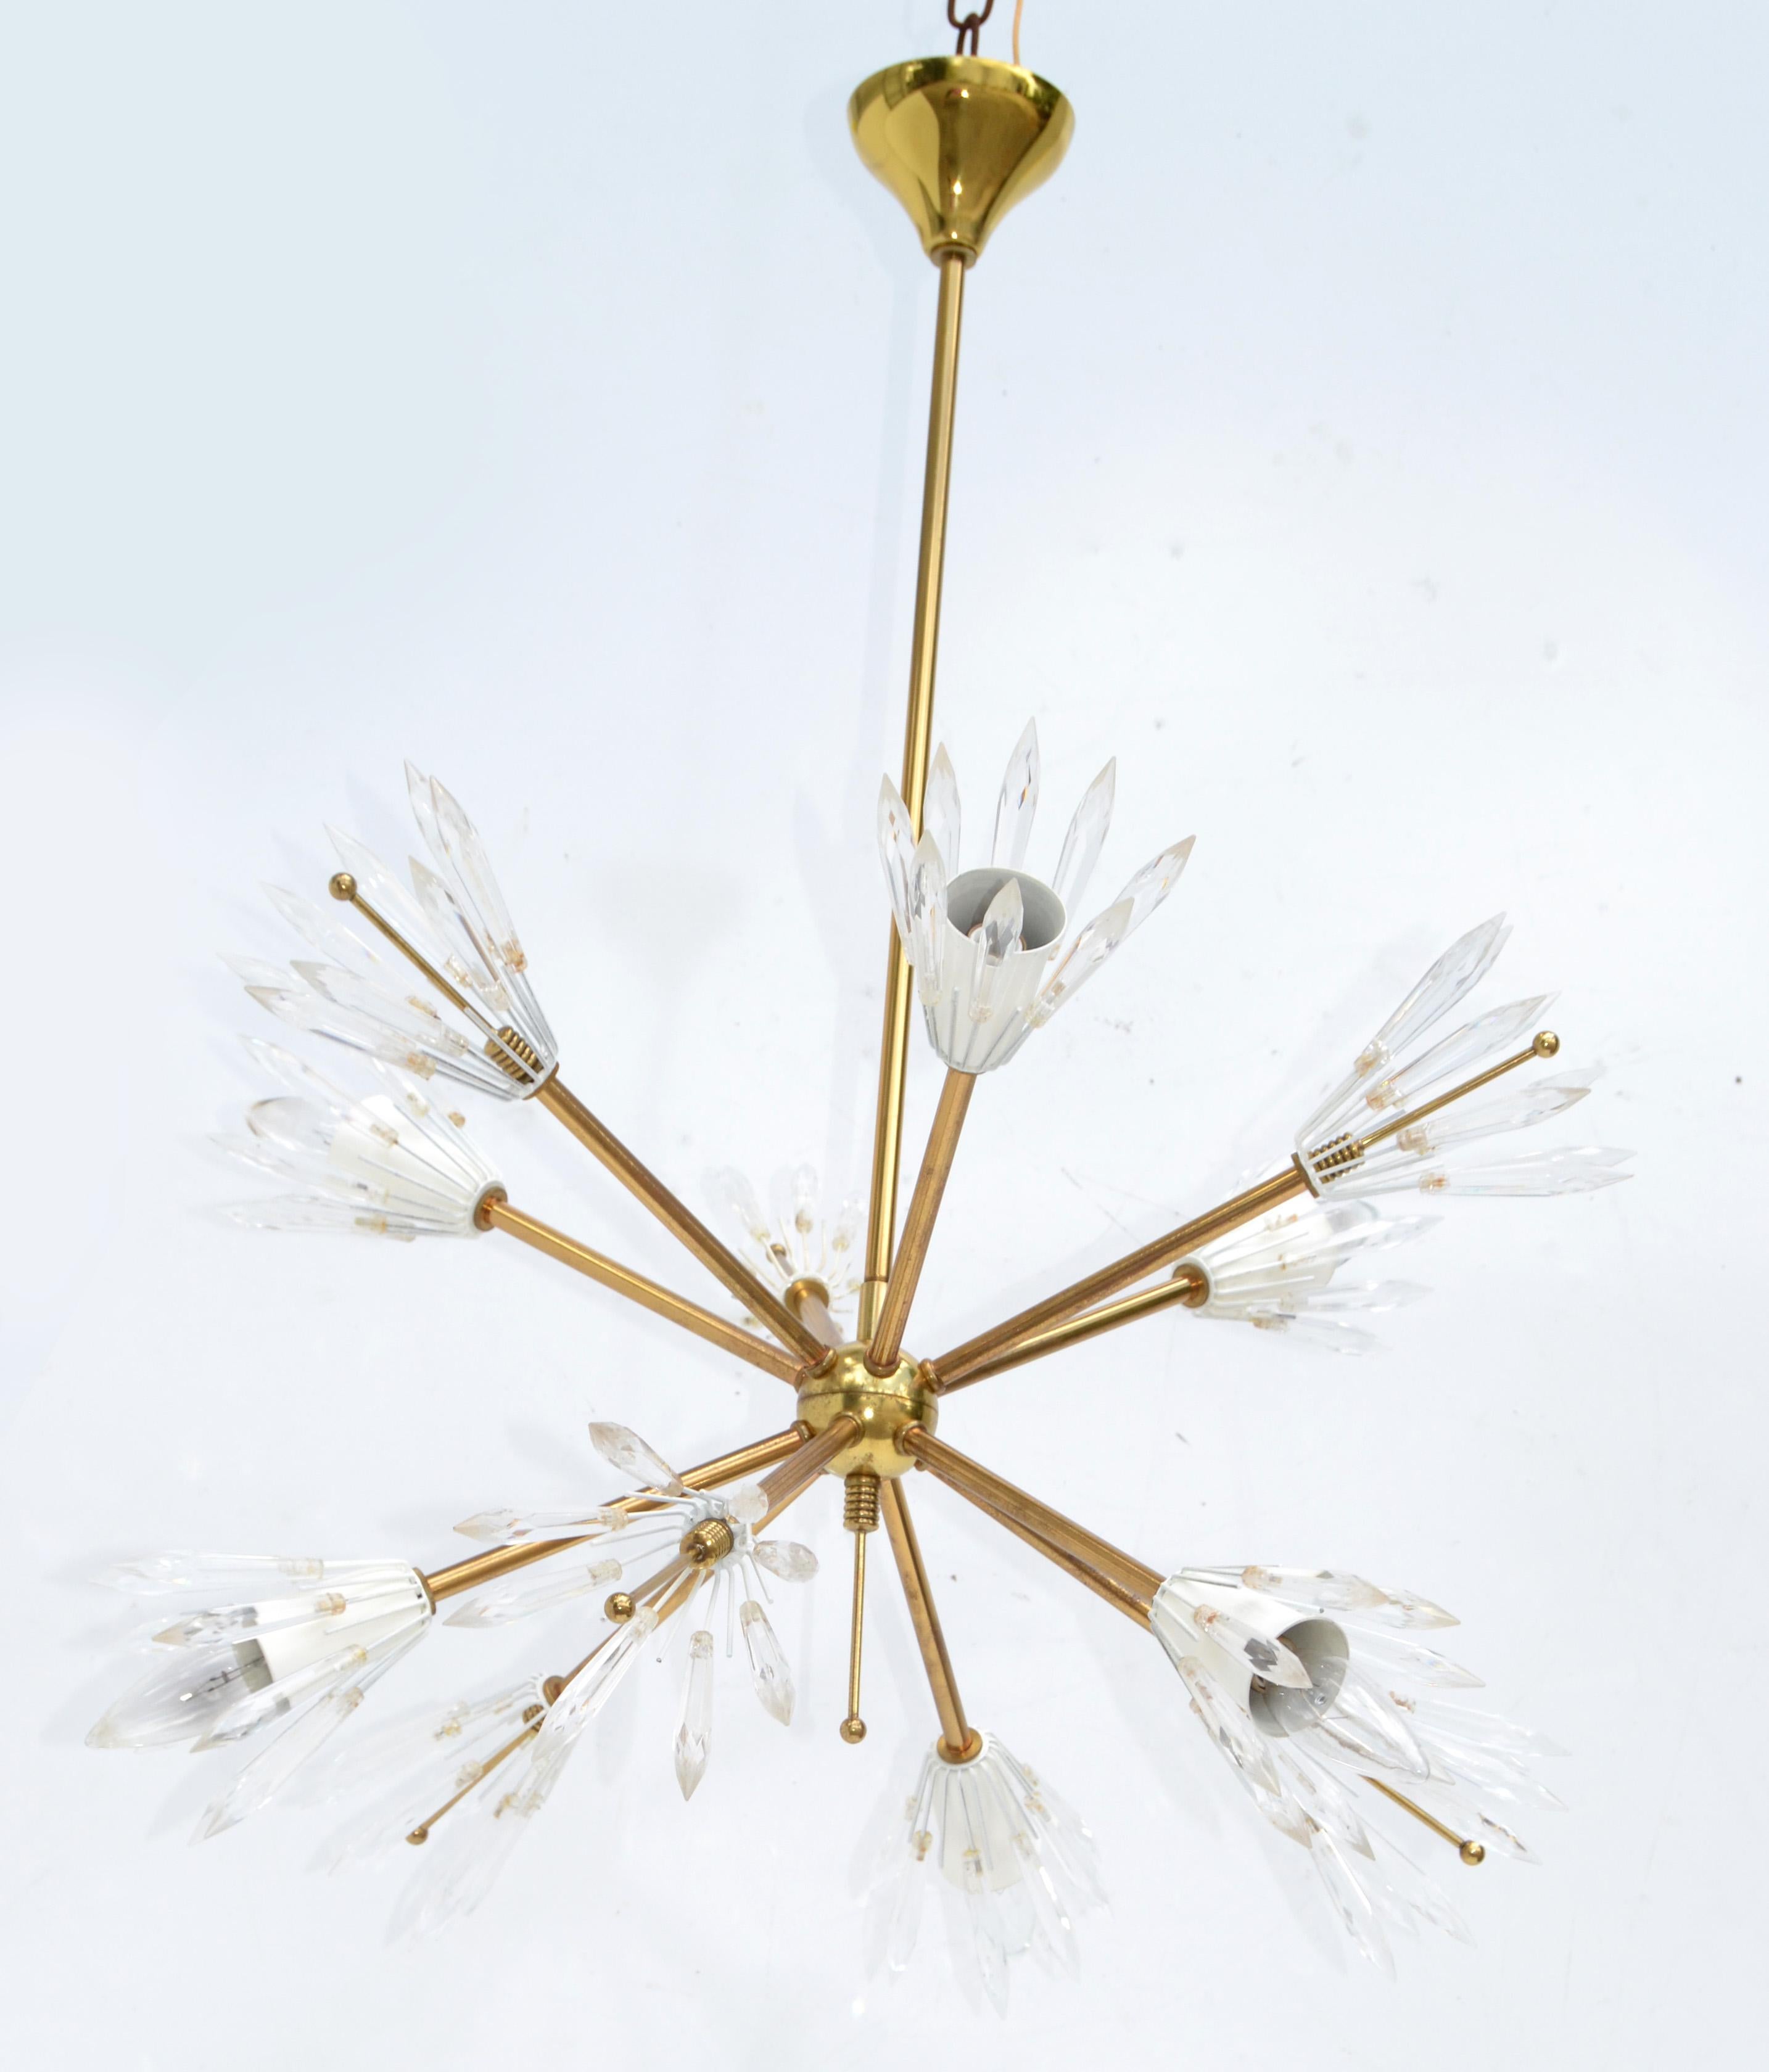 Emil Stejnar six light sputnik pendant lamp, orbit chandelier in brass and blown glass elements by Rupert Nikoll.
Original condition wired for the US and takes 6 Light Bulbs max. 40 watts.
Mid-Century Modern craftsmanship from Austria and made in